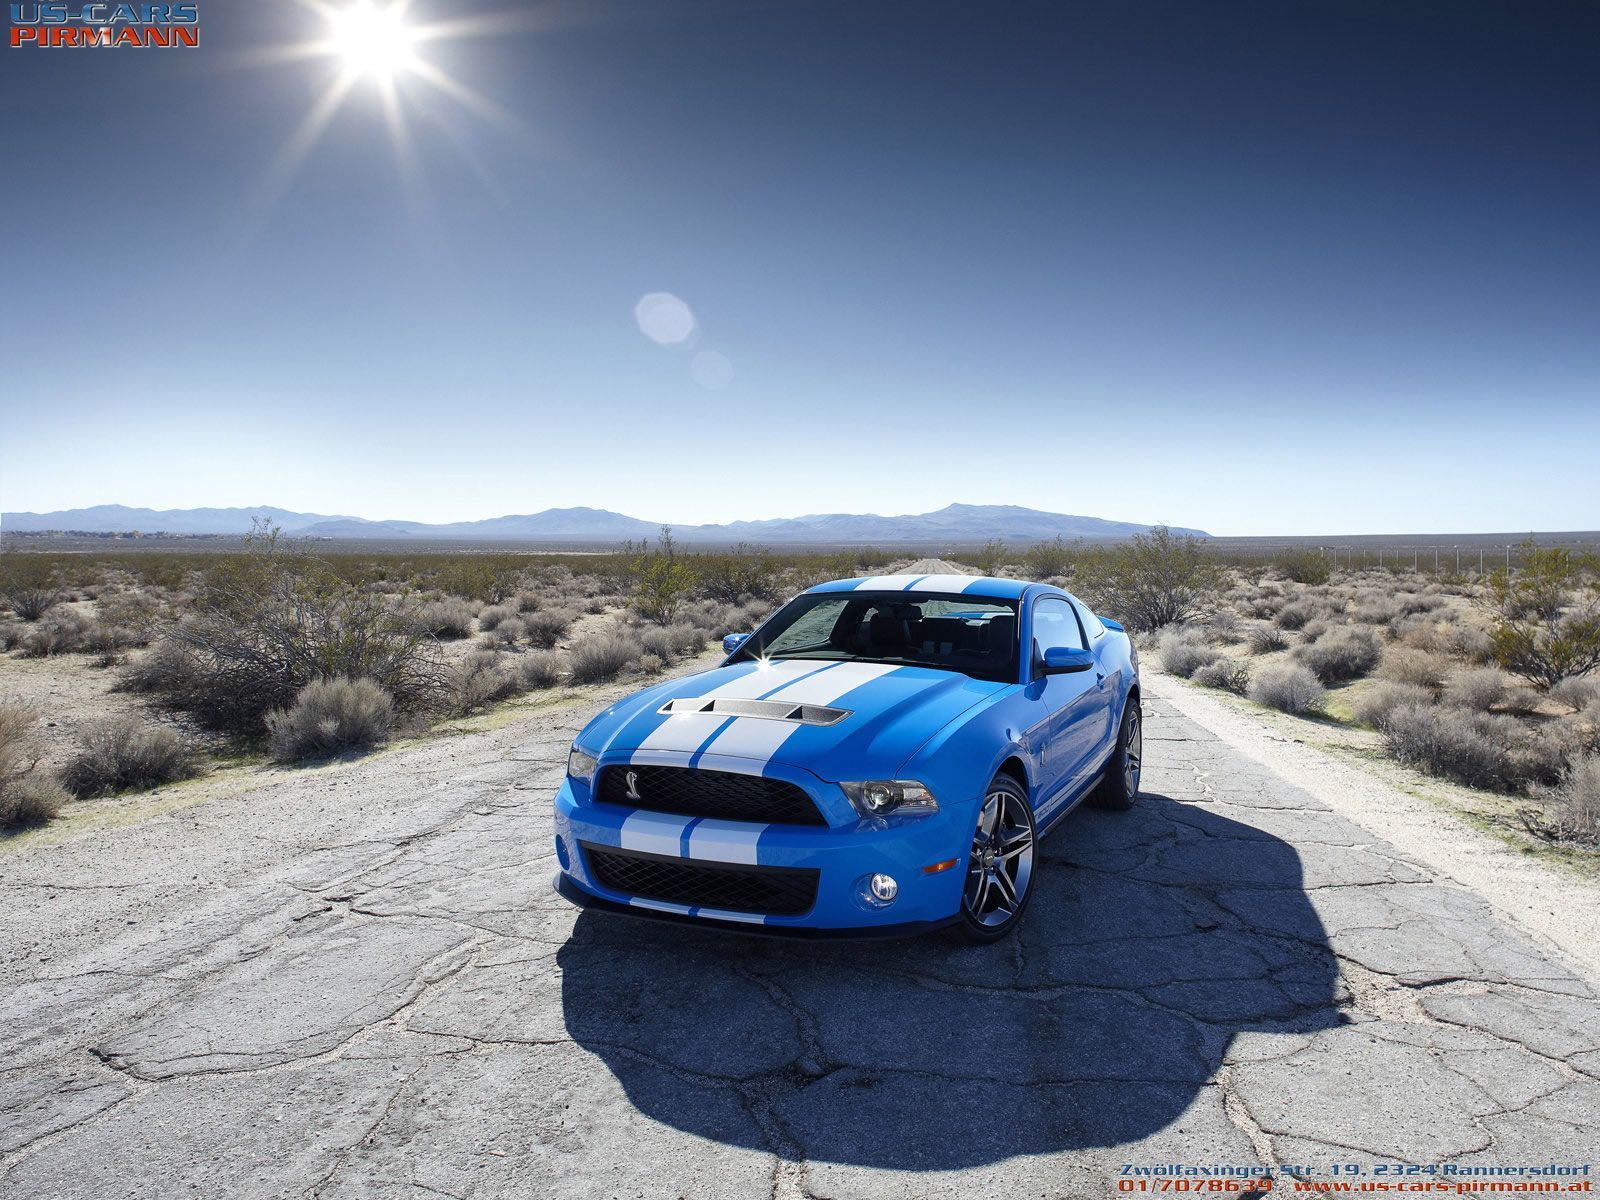 Best Of Ford Mustang Shelby Wallpaper Full HD Pictures